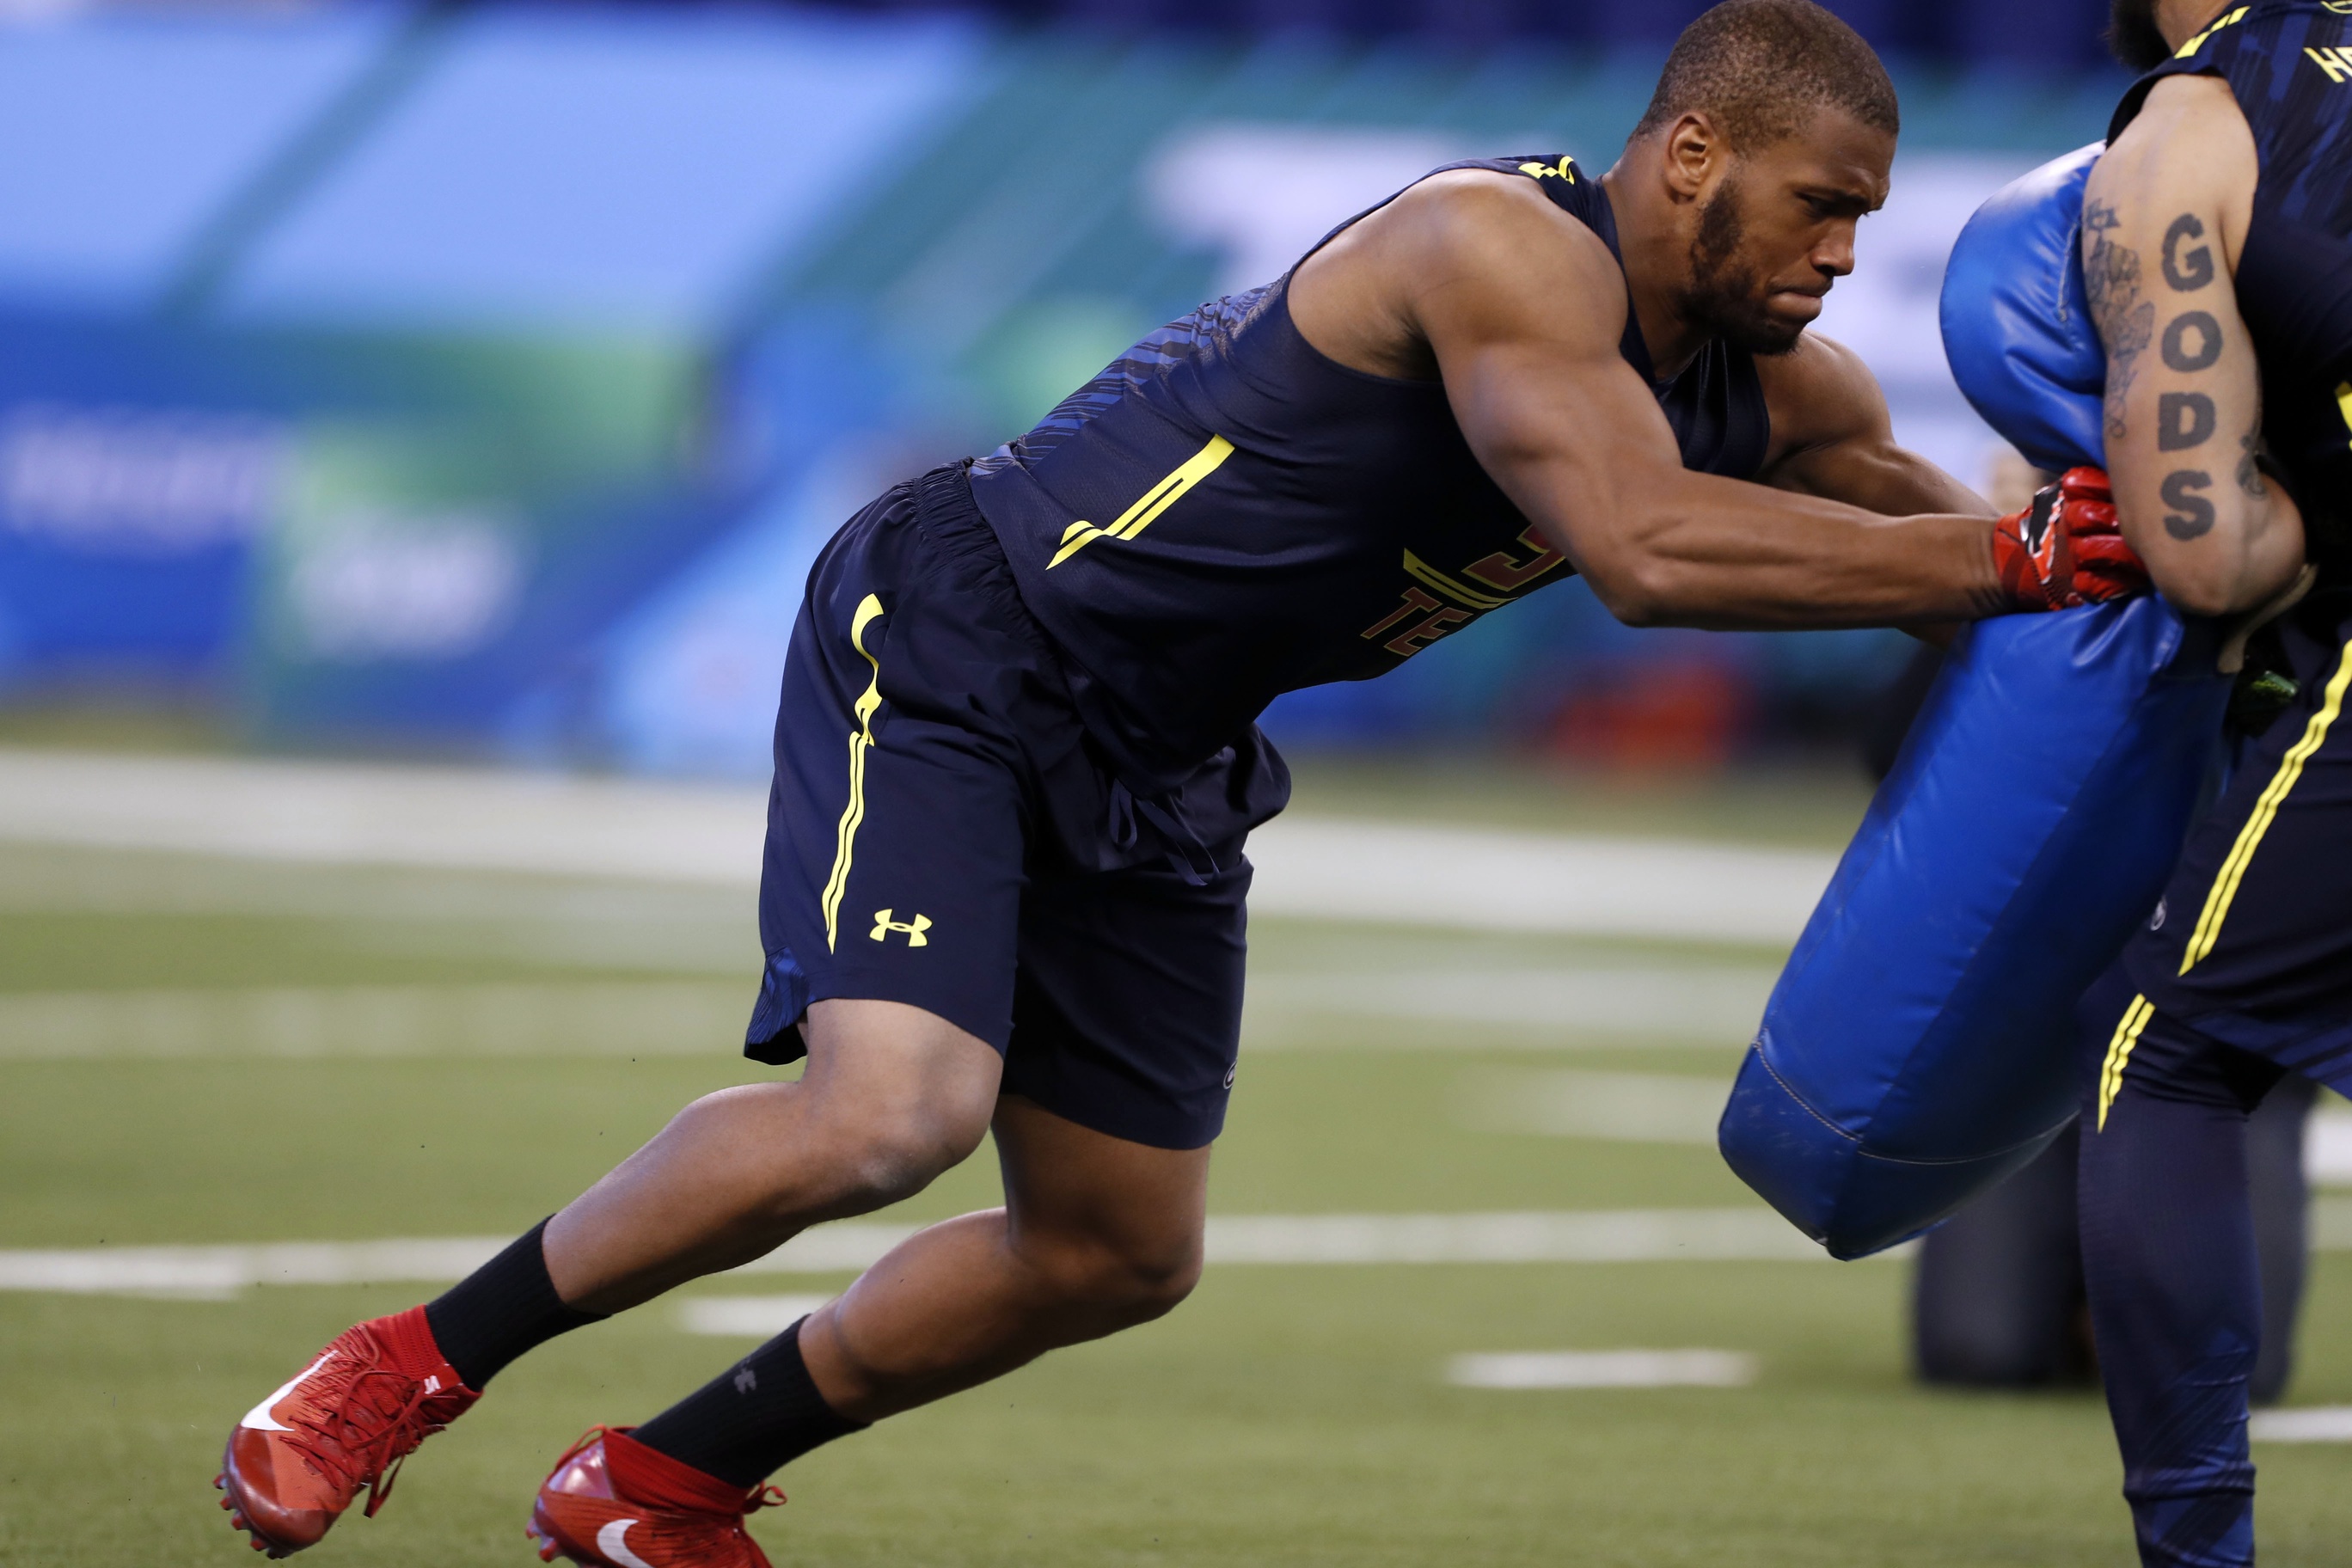 Mar 4, 2017; Indianapolis, IN, USA; Alabama Crimson Tide tight end O.J. Howard goes through workout drills during the 2017 NFL Combine at Lucas Oil Stadium. Mandatory Credit: Brian Spurlock-USA TODAY Sports